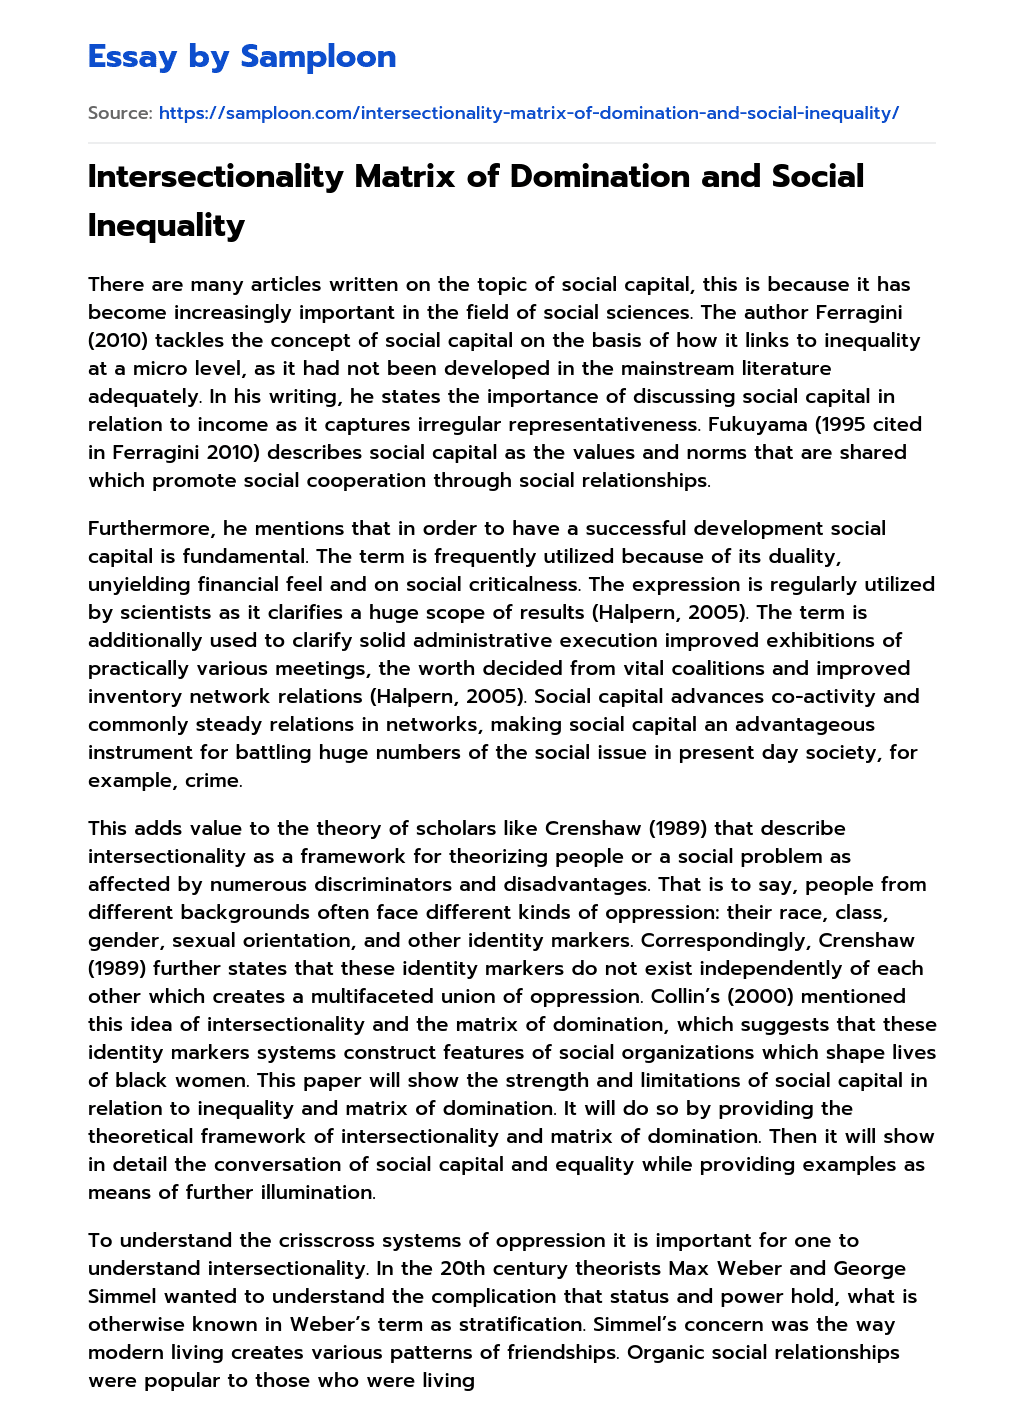 thesis statement on intersectionality